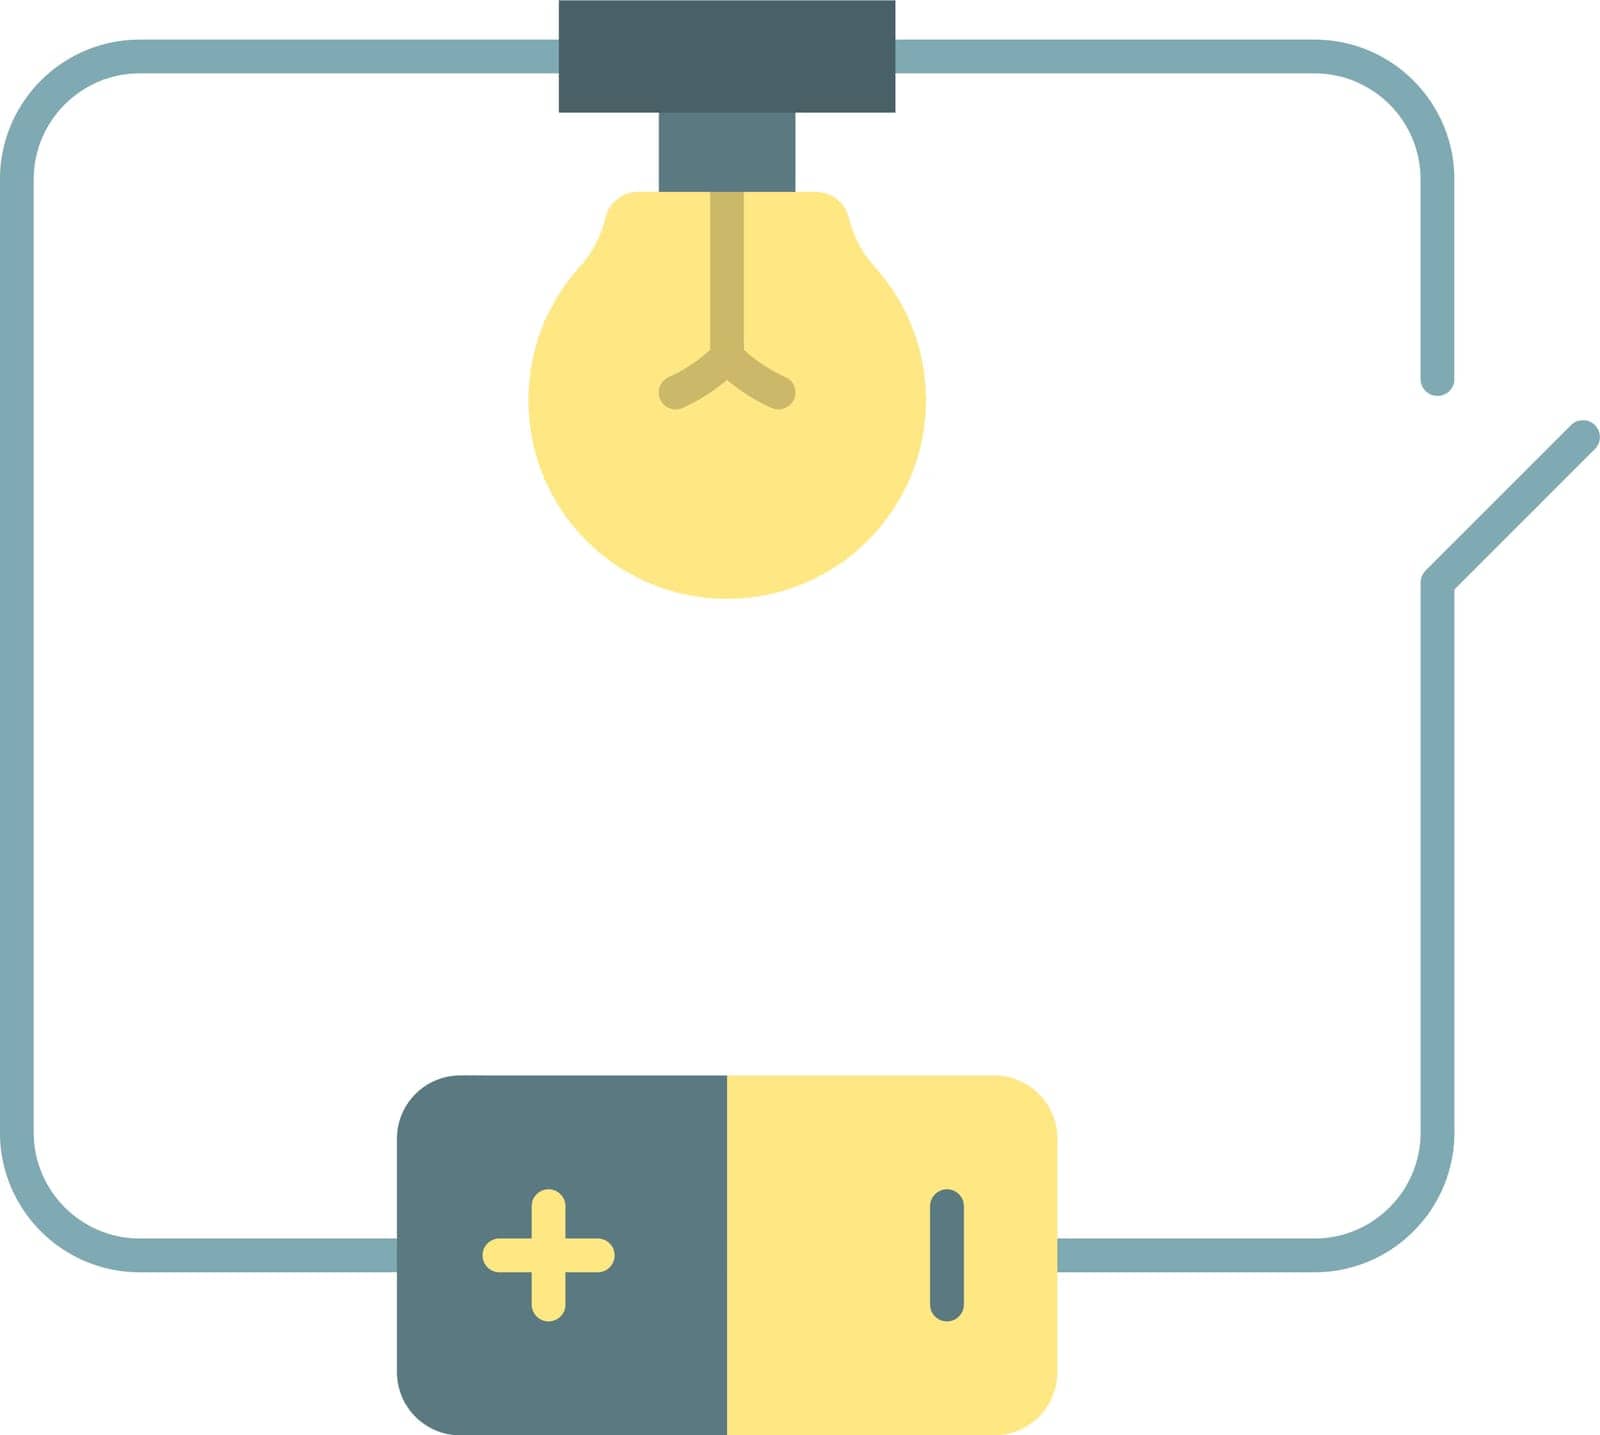 Electrical Circuit icon vector image. Suitable for mobile application web application and print media.